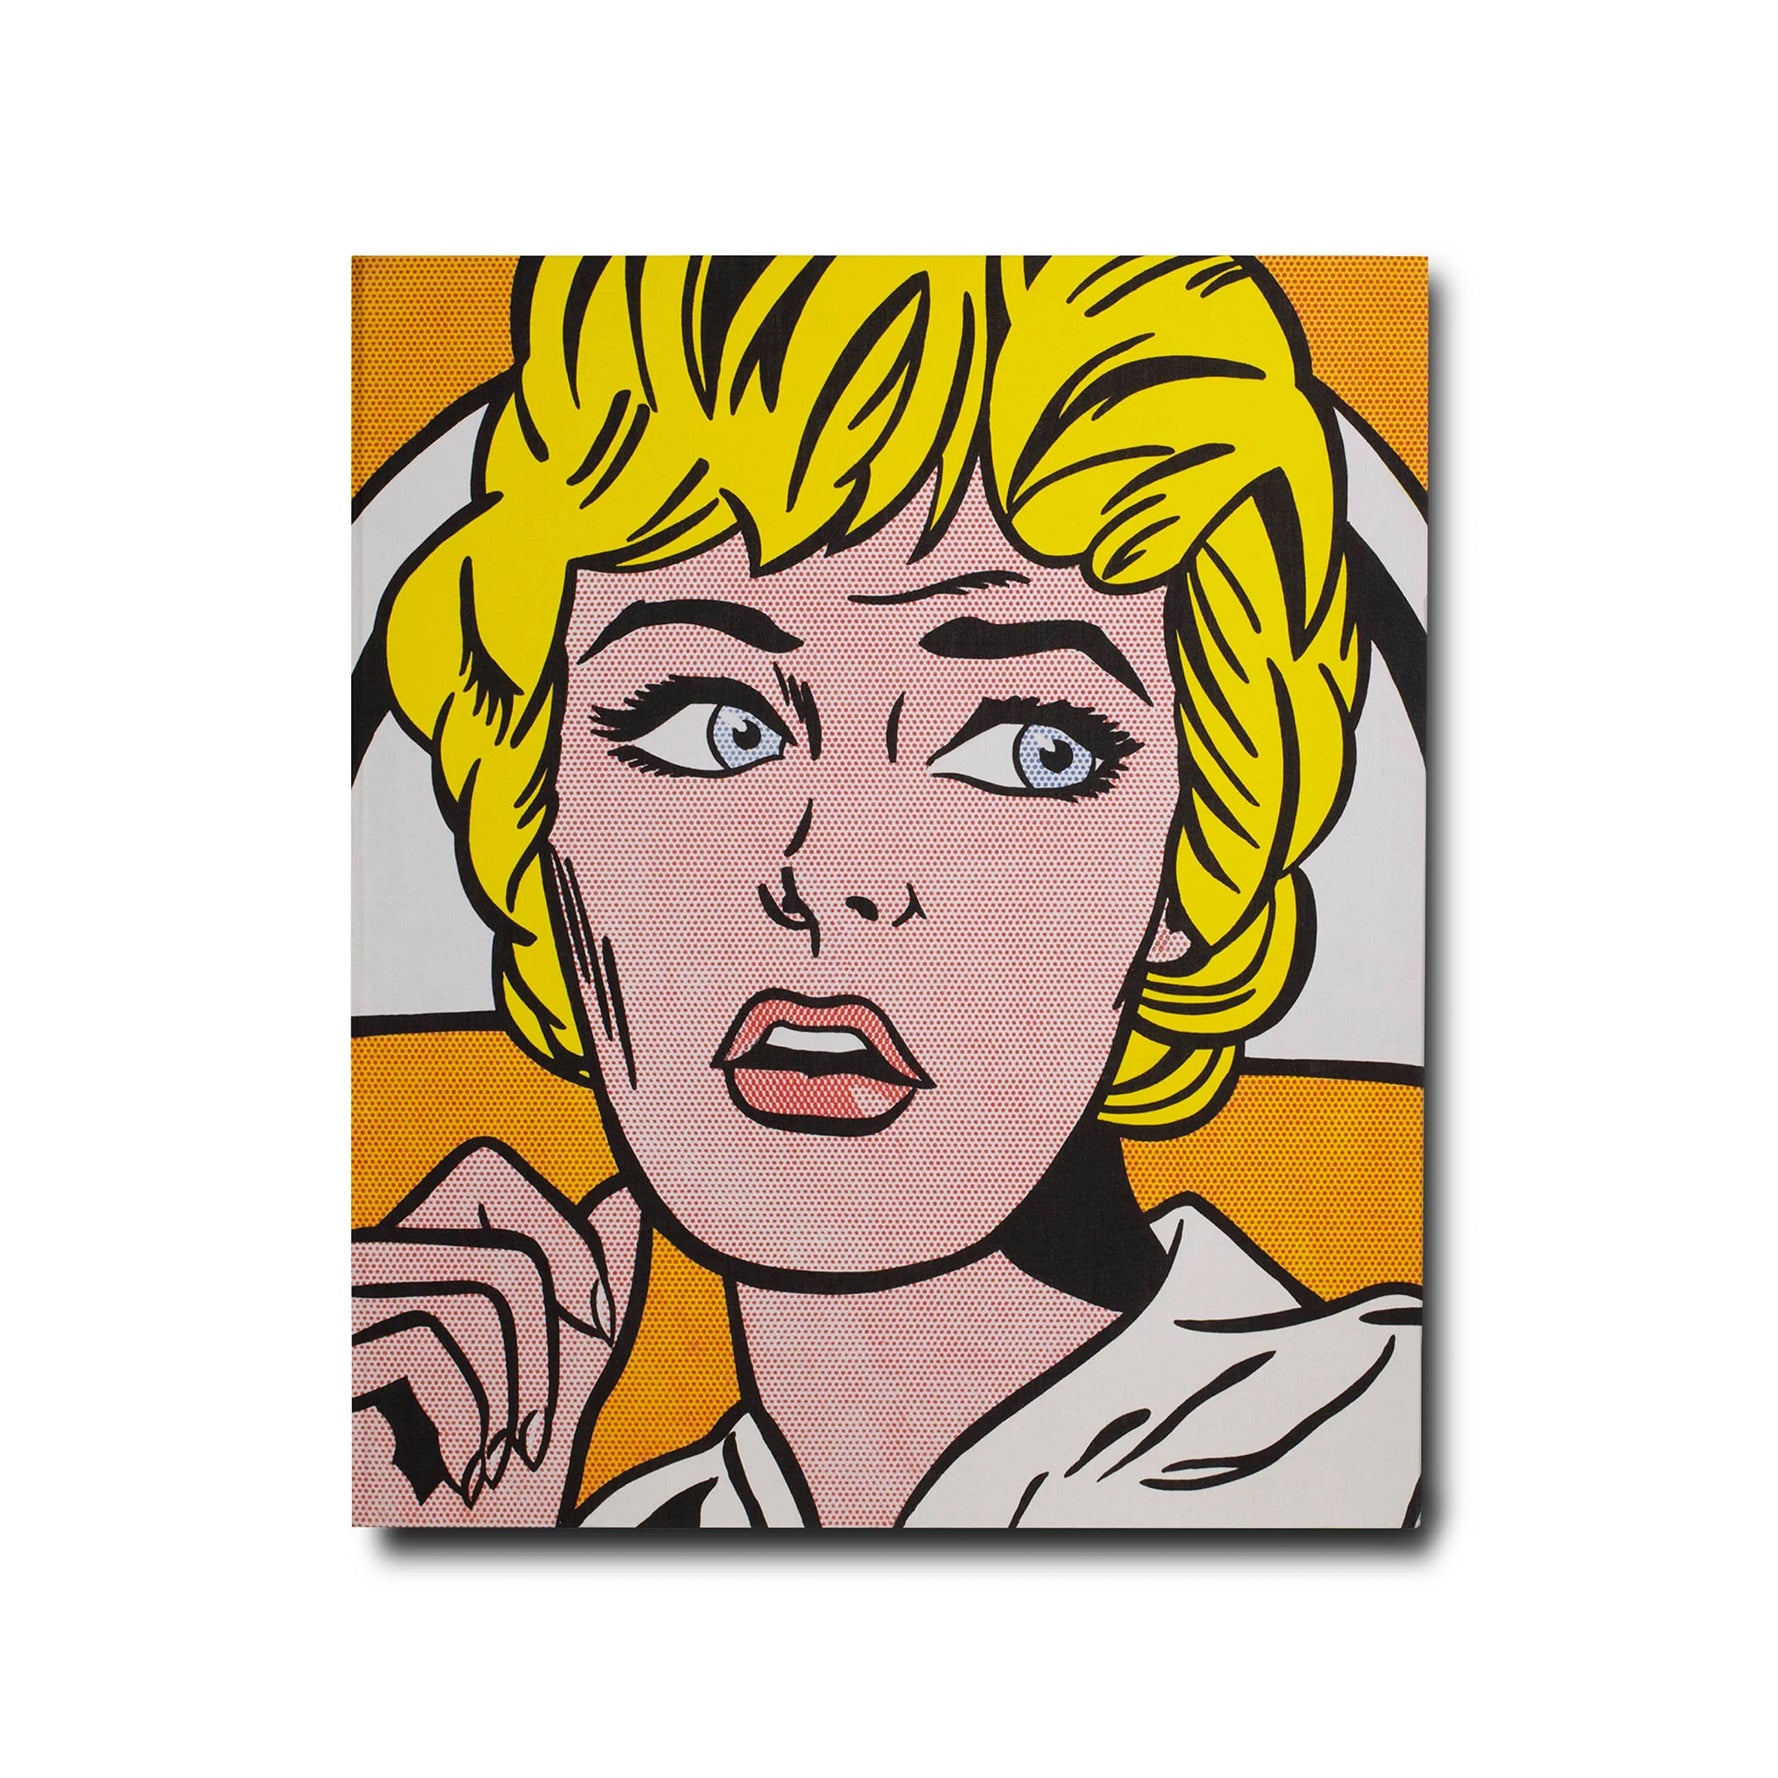 Roy Lichtenstein: The Impossible Collection by Assouline